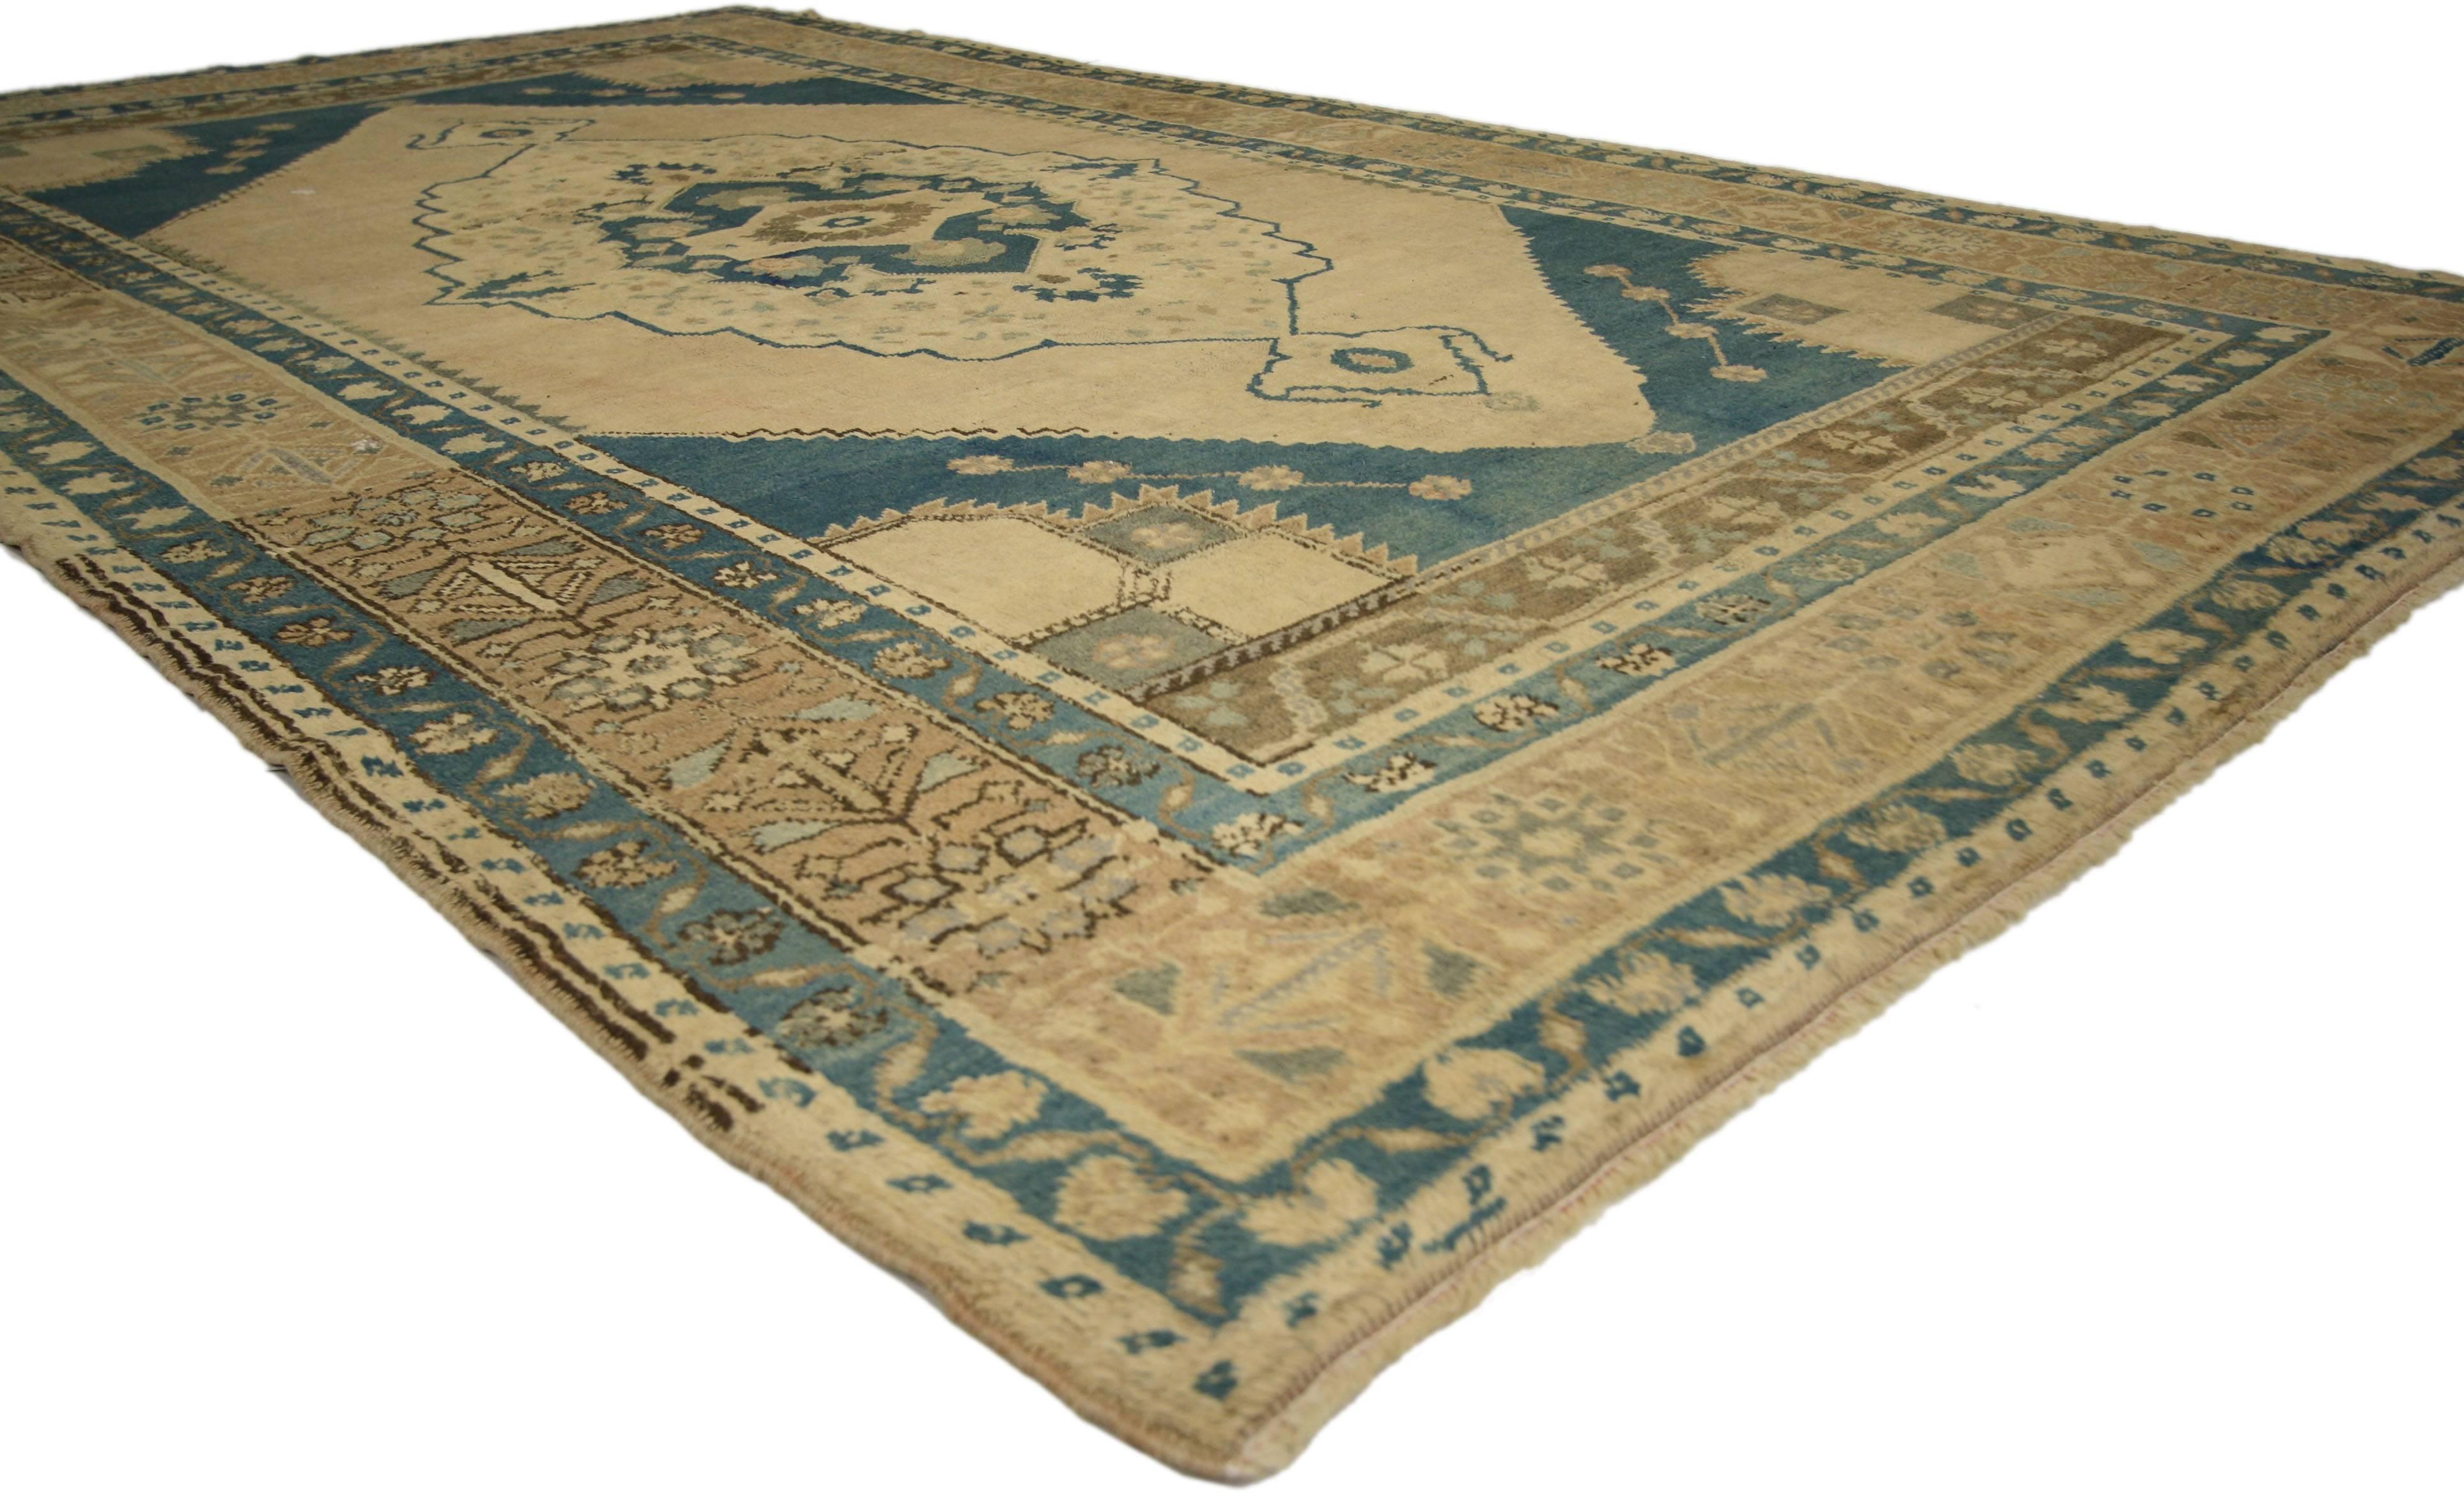 74103 Vintage Turkish Oushak Rug with Mid-Century Modern Style 05’06 x 09’10. Warm and inviting, this hand-knotted wool vintage Turkish Oushak rug beautifully embodies mid-century modern style. It features an elongated cusped center medallion